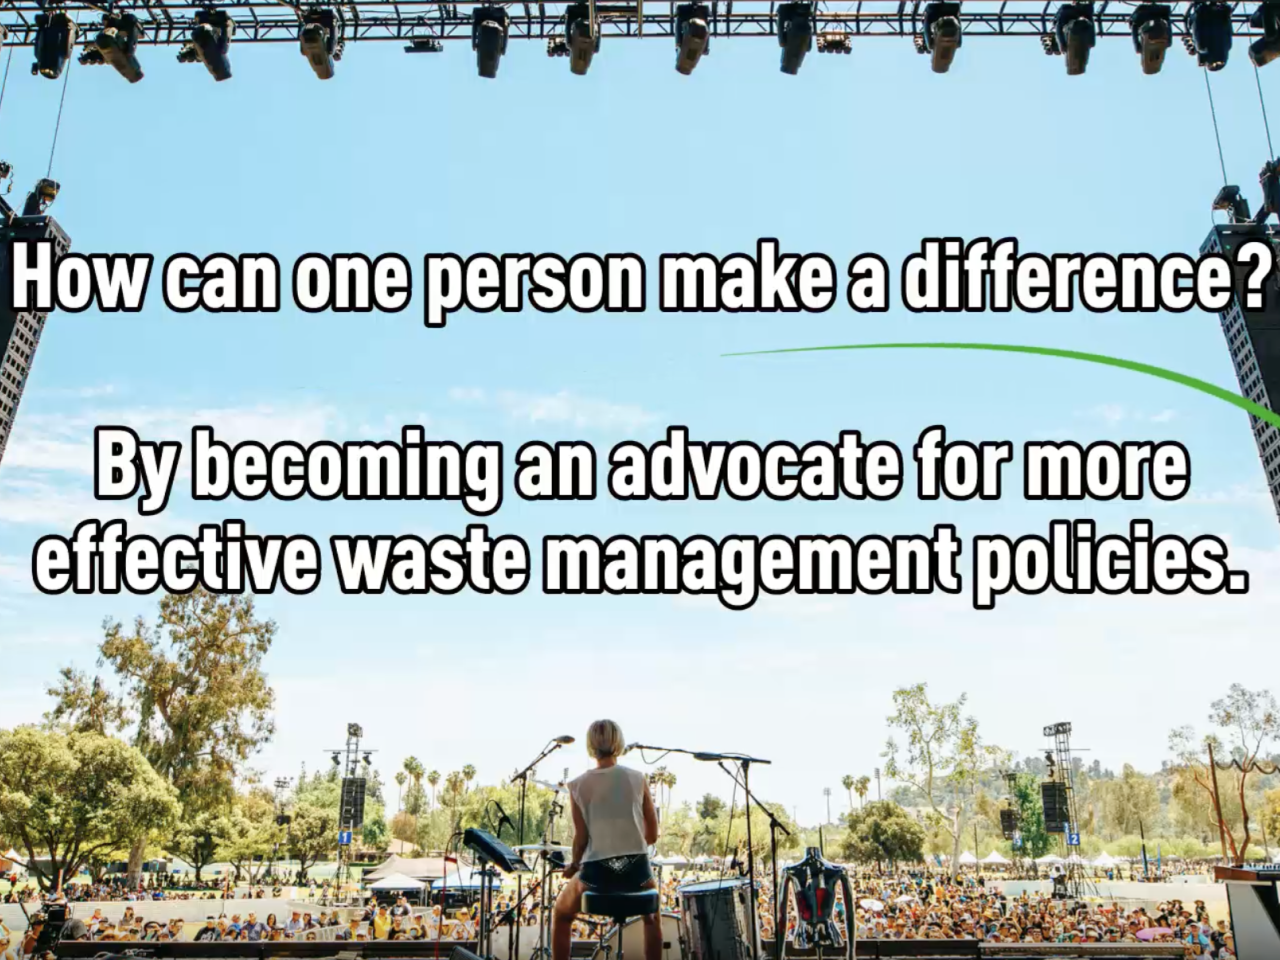 "How can one person make a difference? By becoming an advocate for more effective waste management policies"